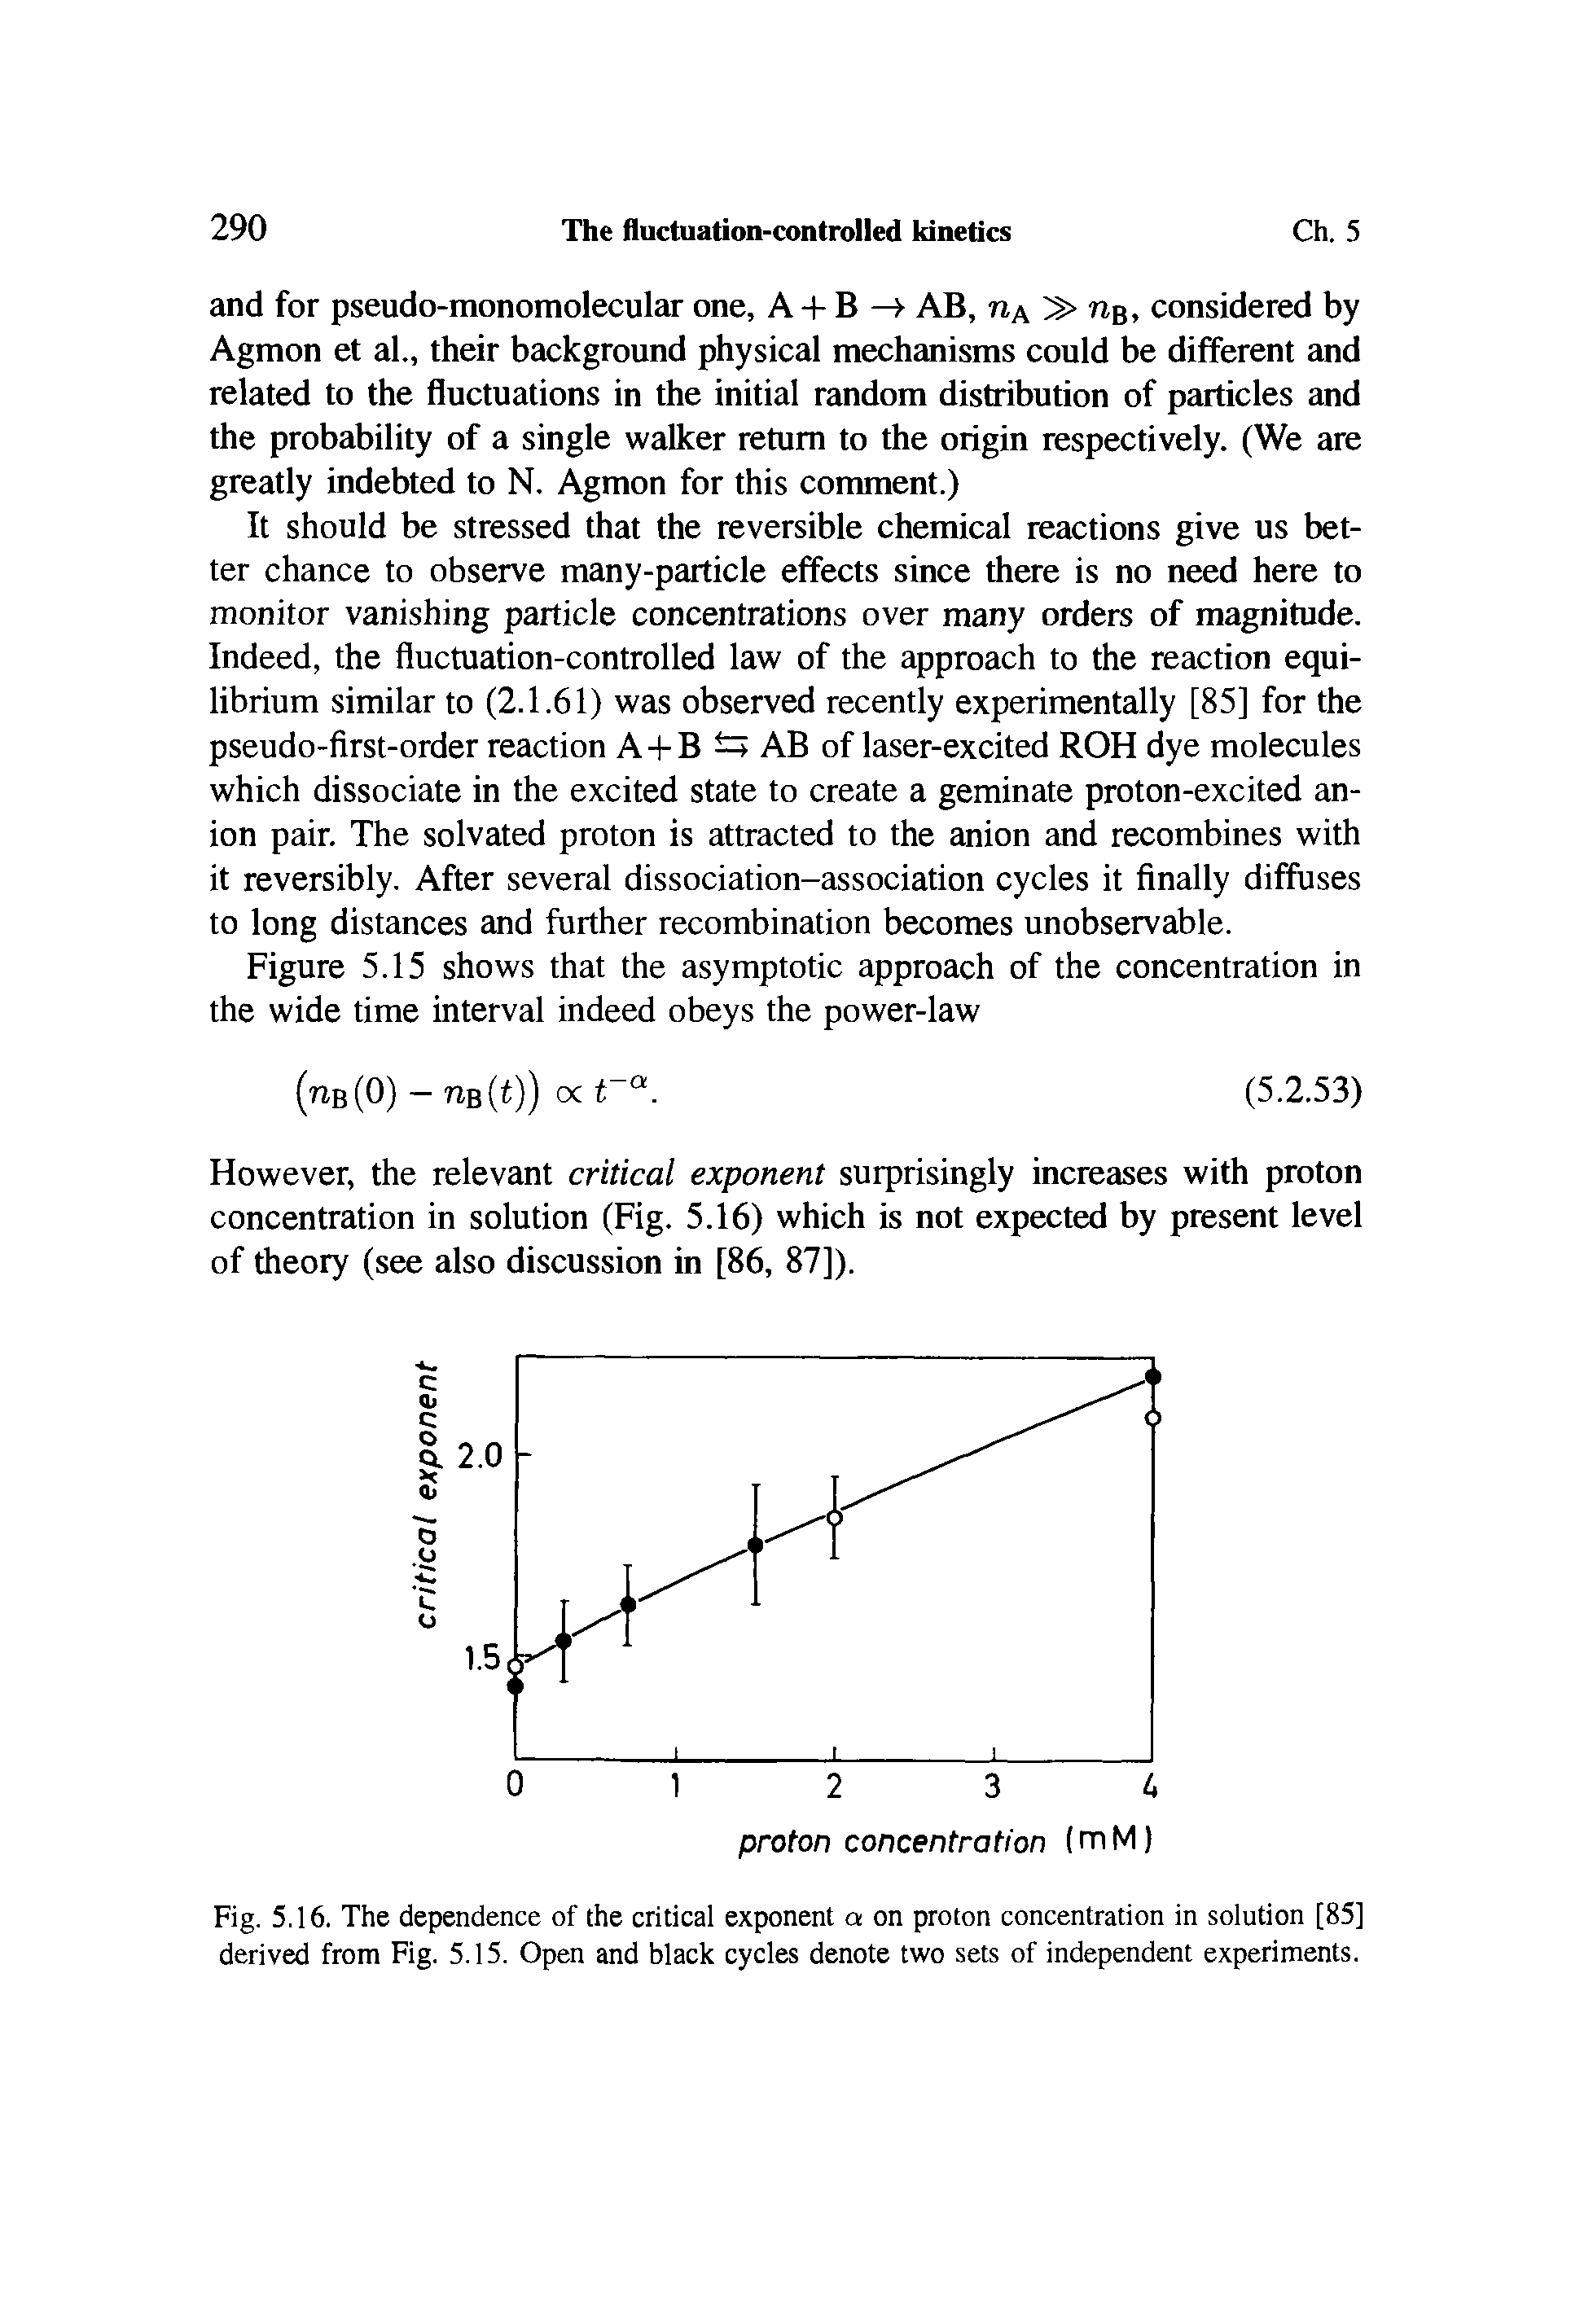 Fig. 5.16. The dependence of the critical exponent a on proton concentration in solution [85] derived from Fig. 5.15. Open and black cycles denote two sets of independent experiments.